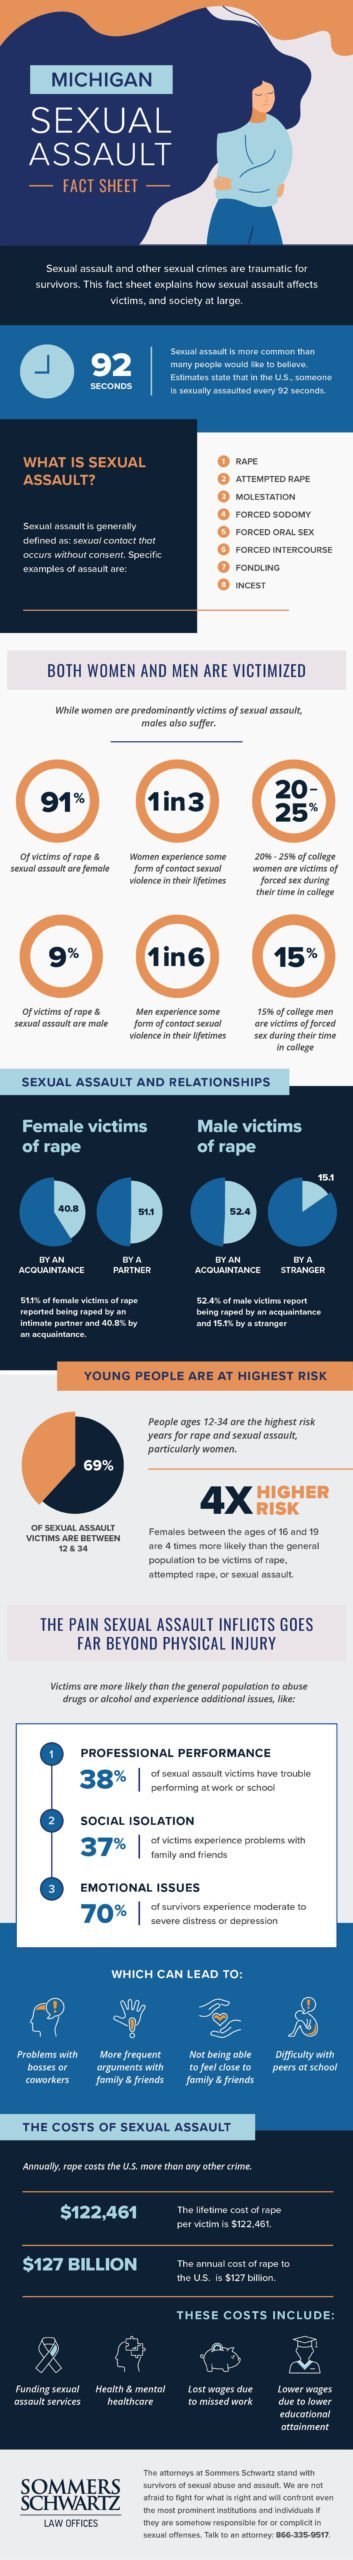 SS SexualAssault infographic scaled